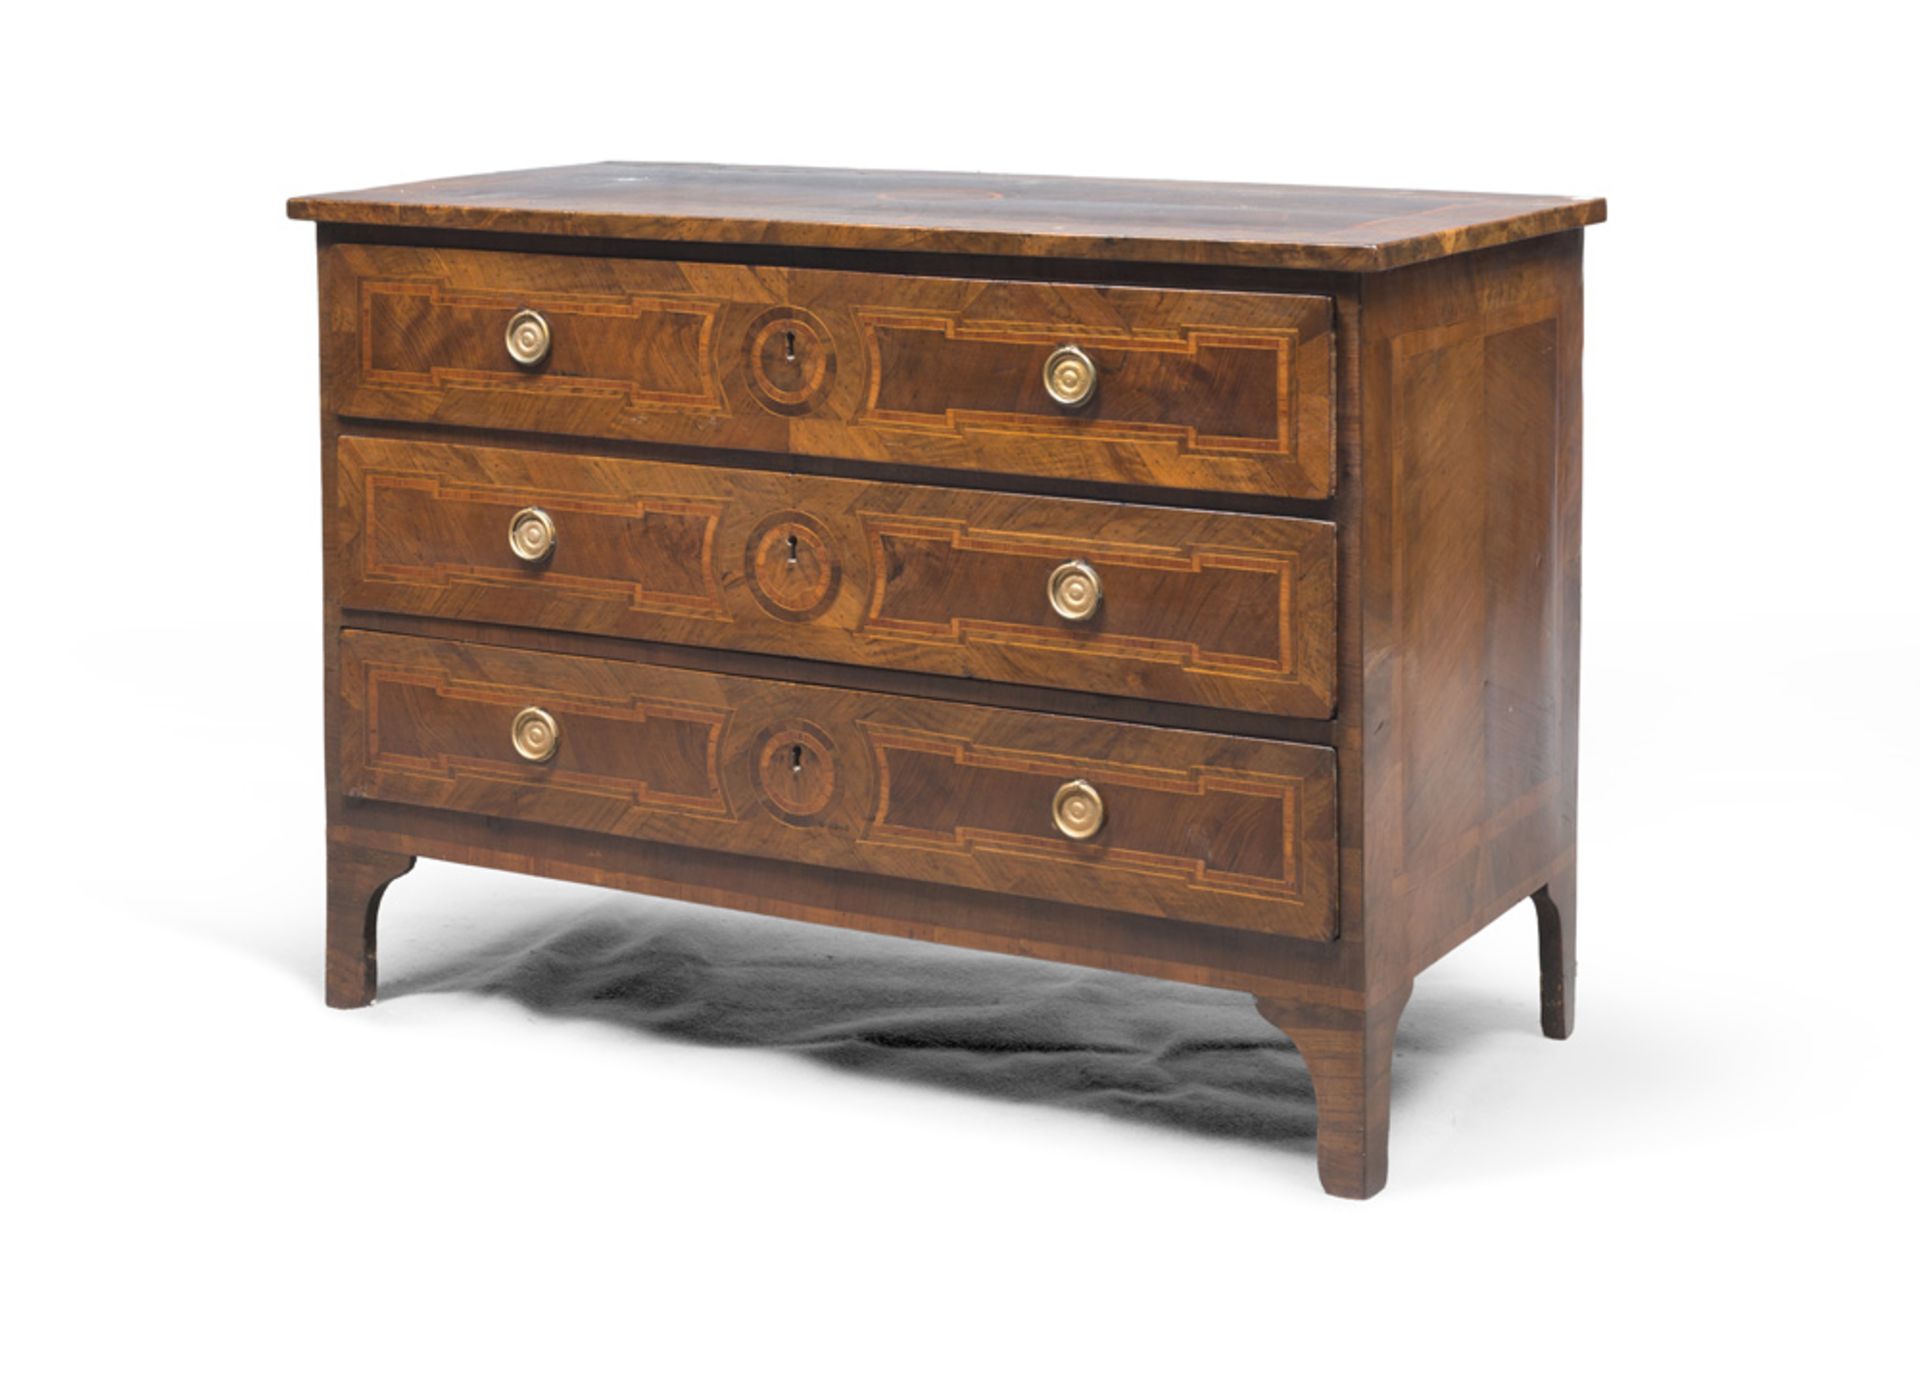 BEAUTIFUL COMMODE IN WALNUT, PROBABLY EMILIA, END 18TH CENTURY with edgings and inlays in rosewood